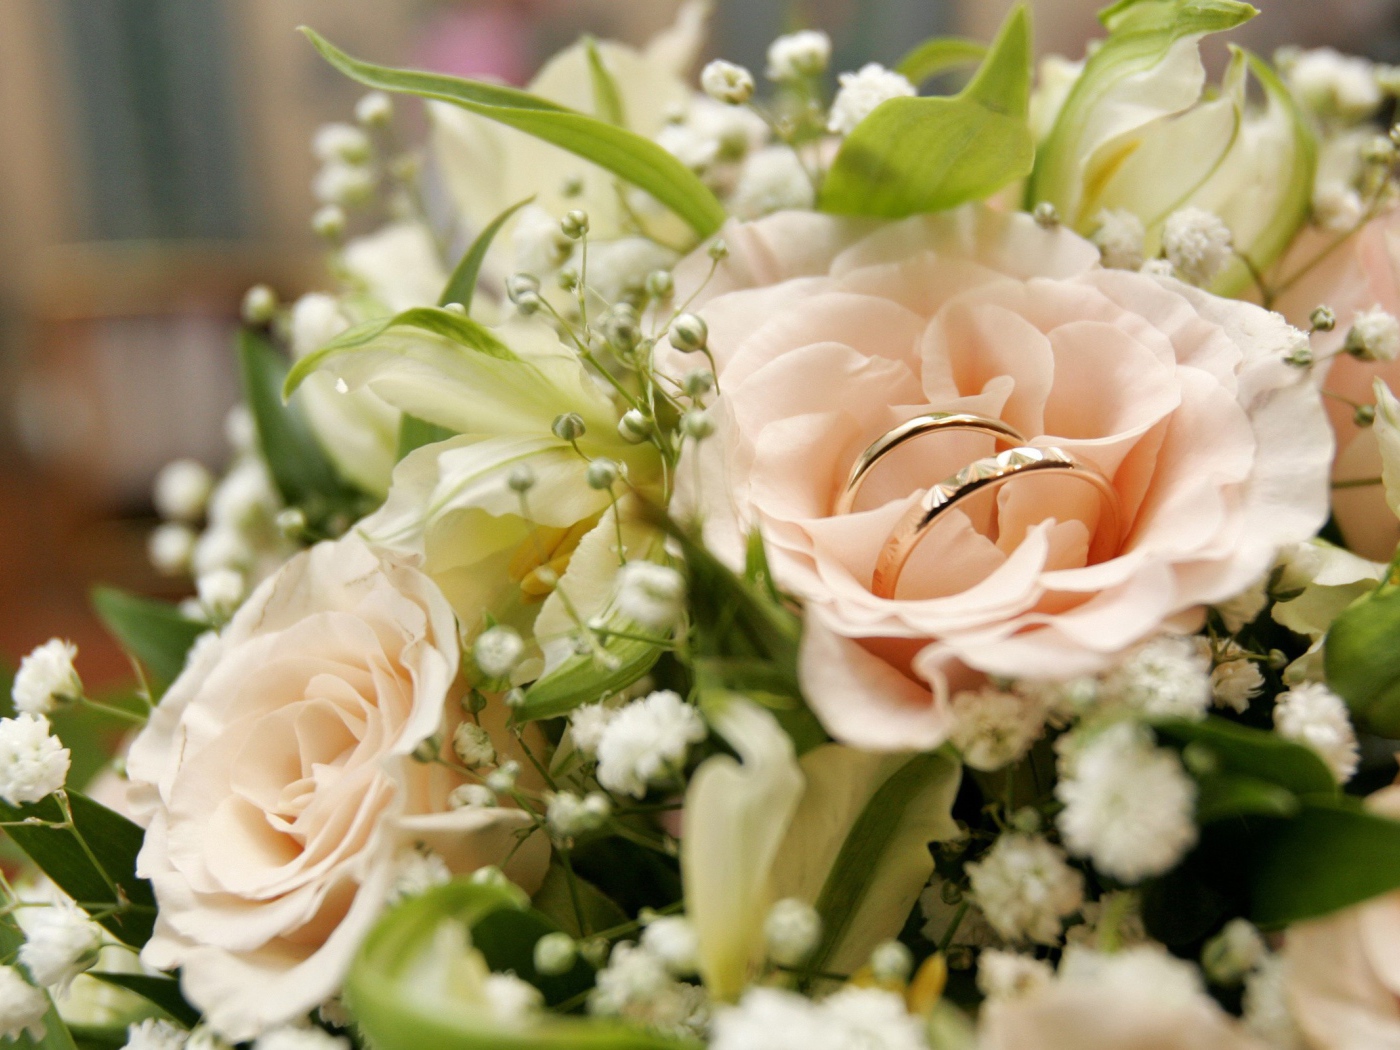 Wedding bouquet with rings